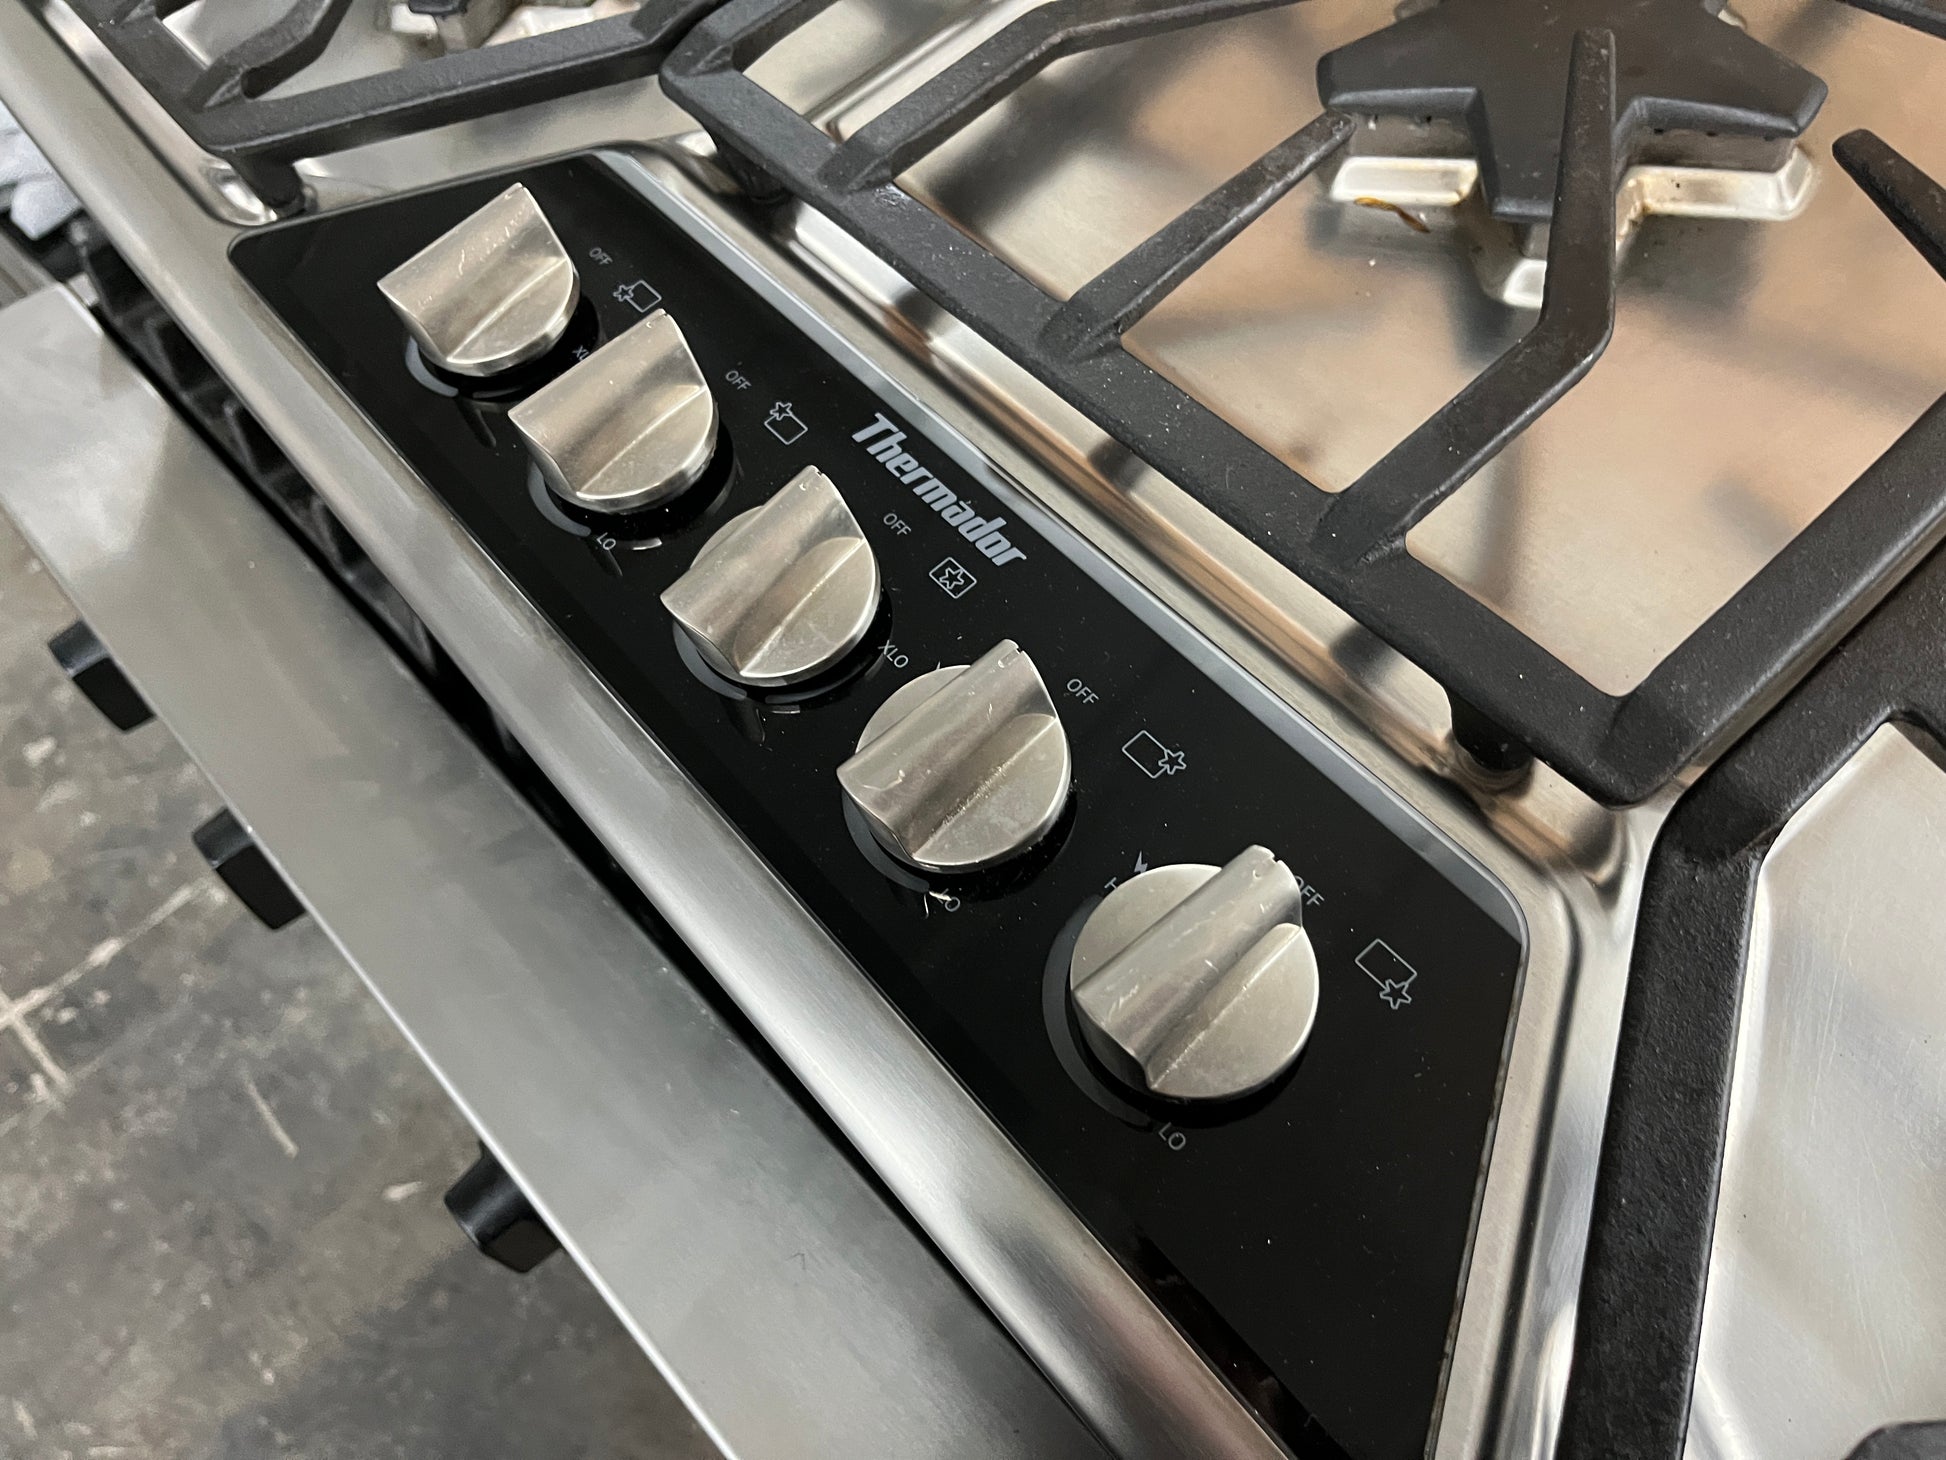 Downdraft Ventilation for Cooktops & Stovetops by Thermador